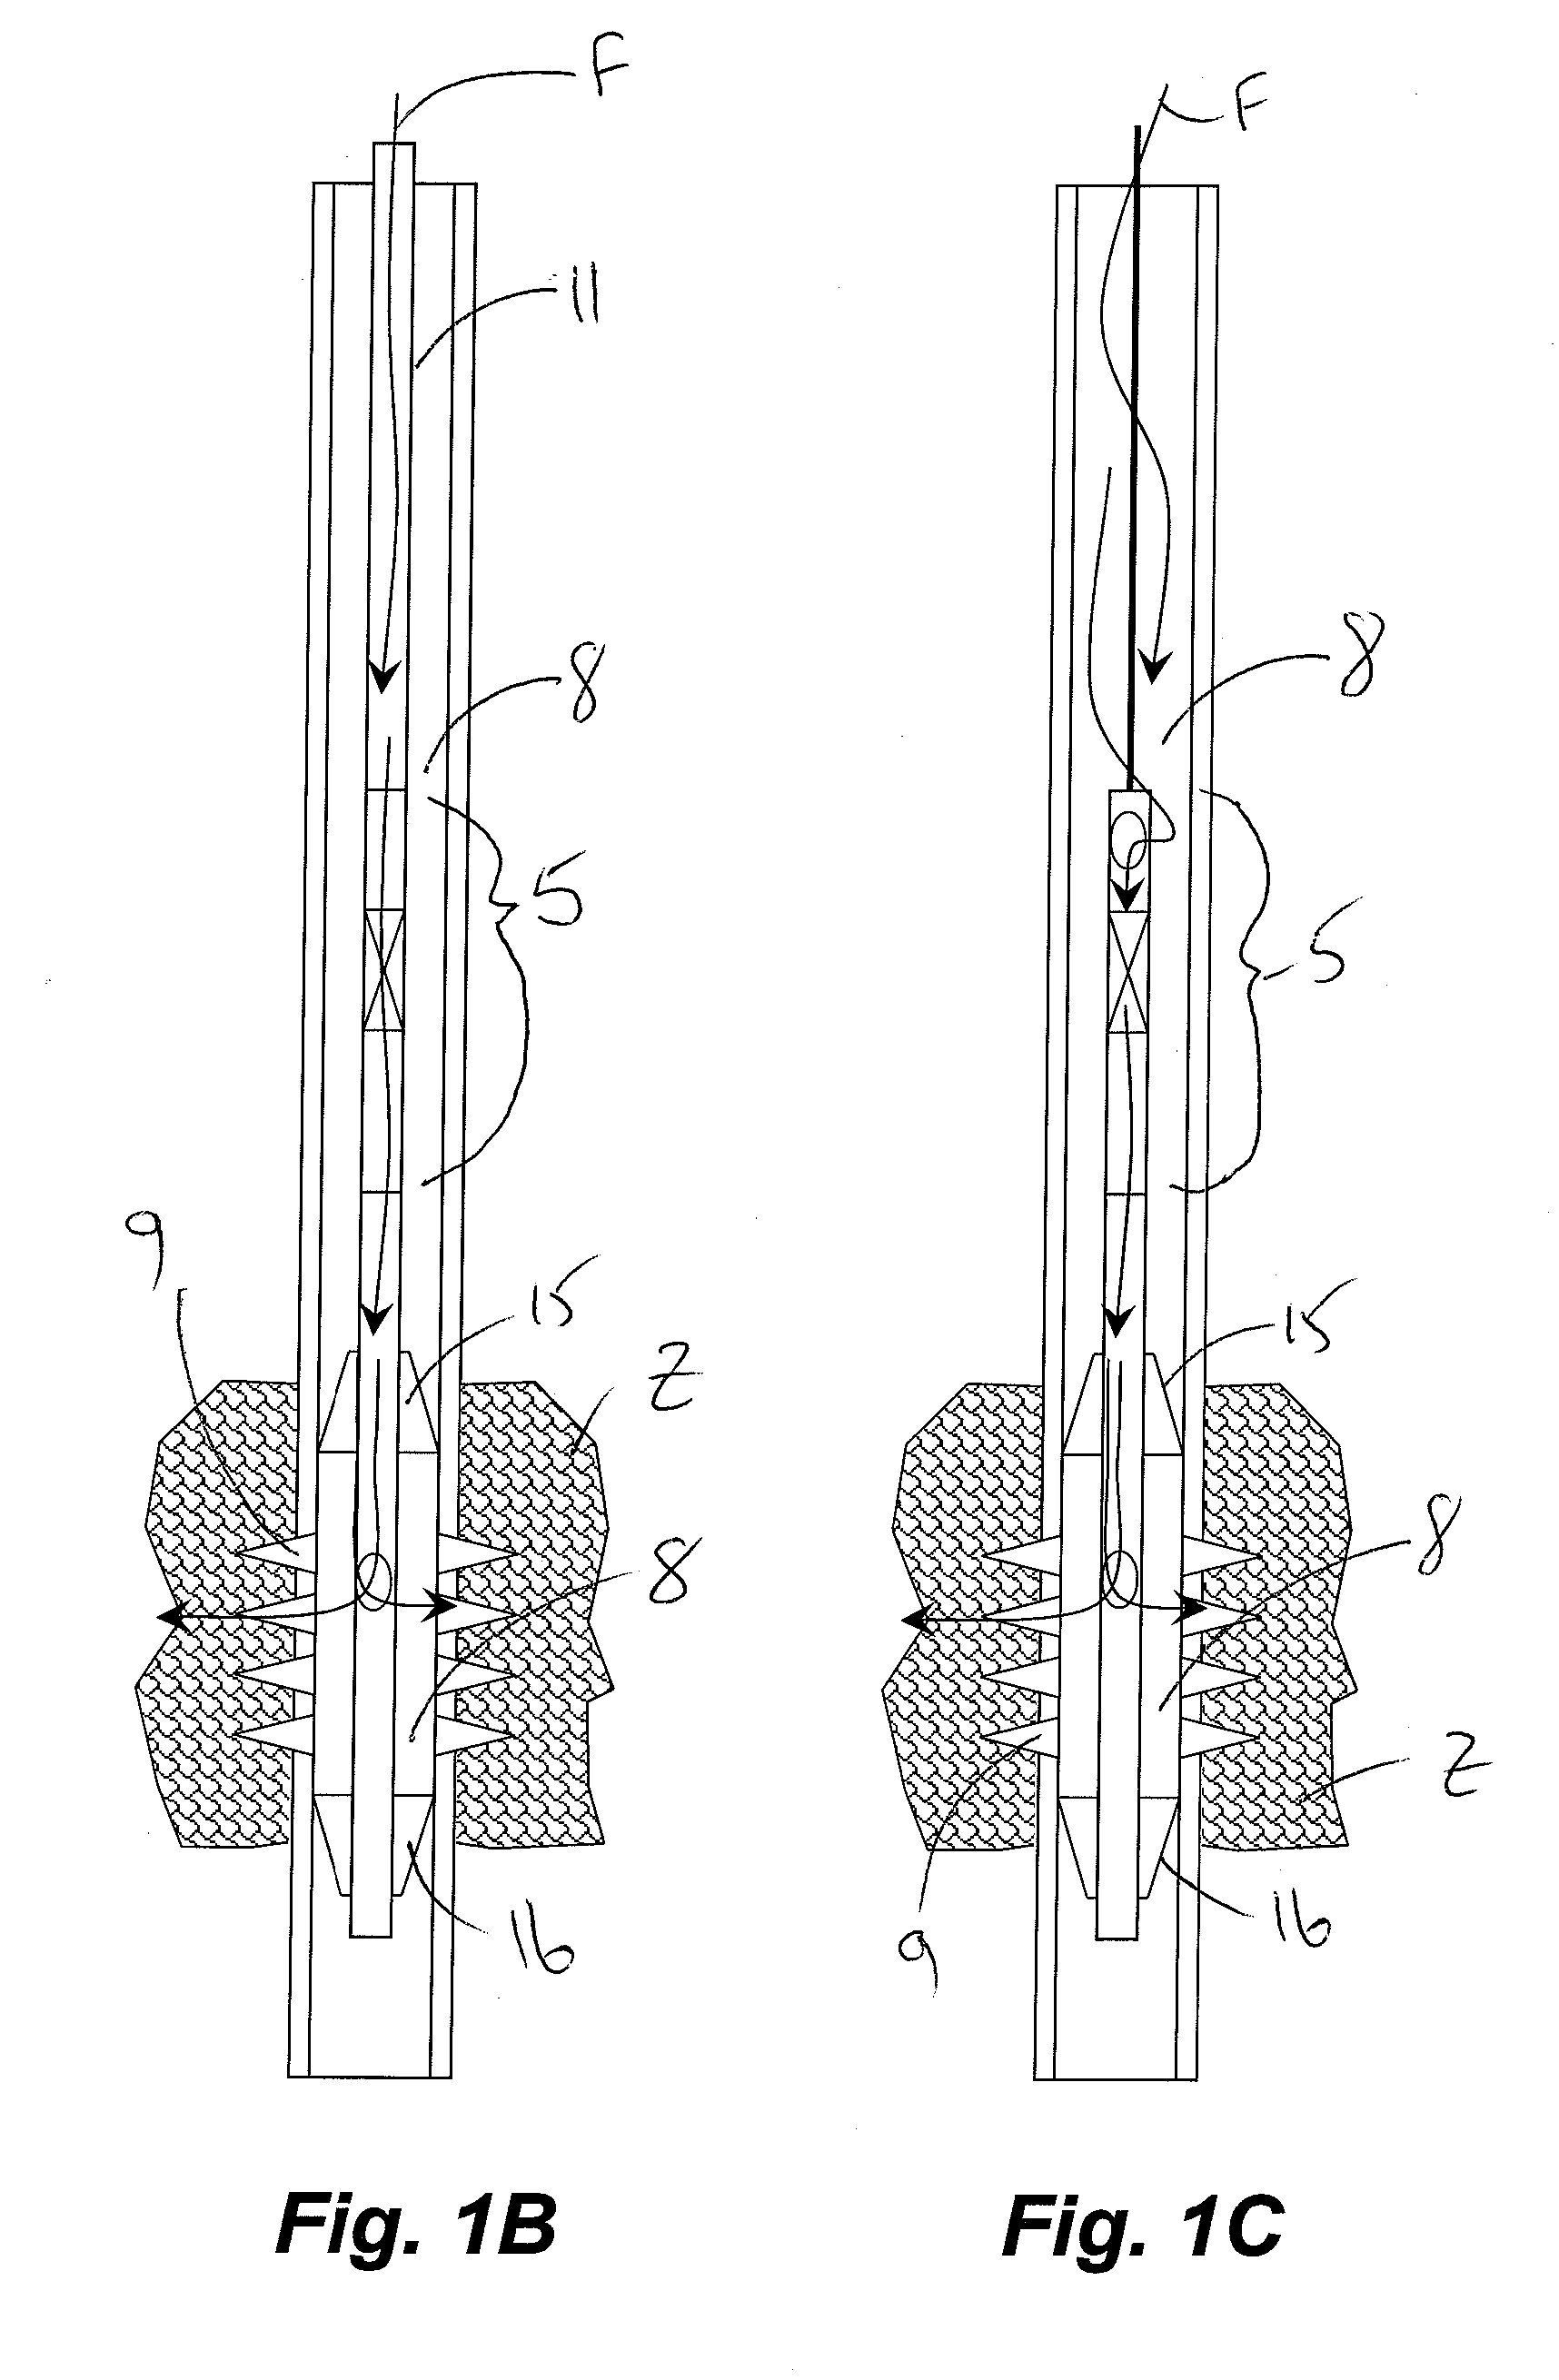 Shock-release fluid fracturing method and apparatus